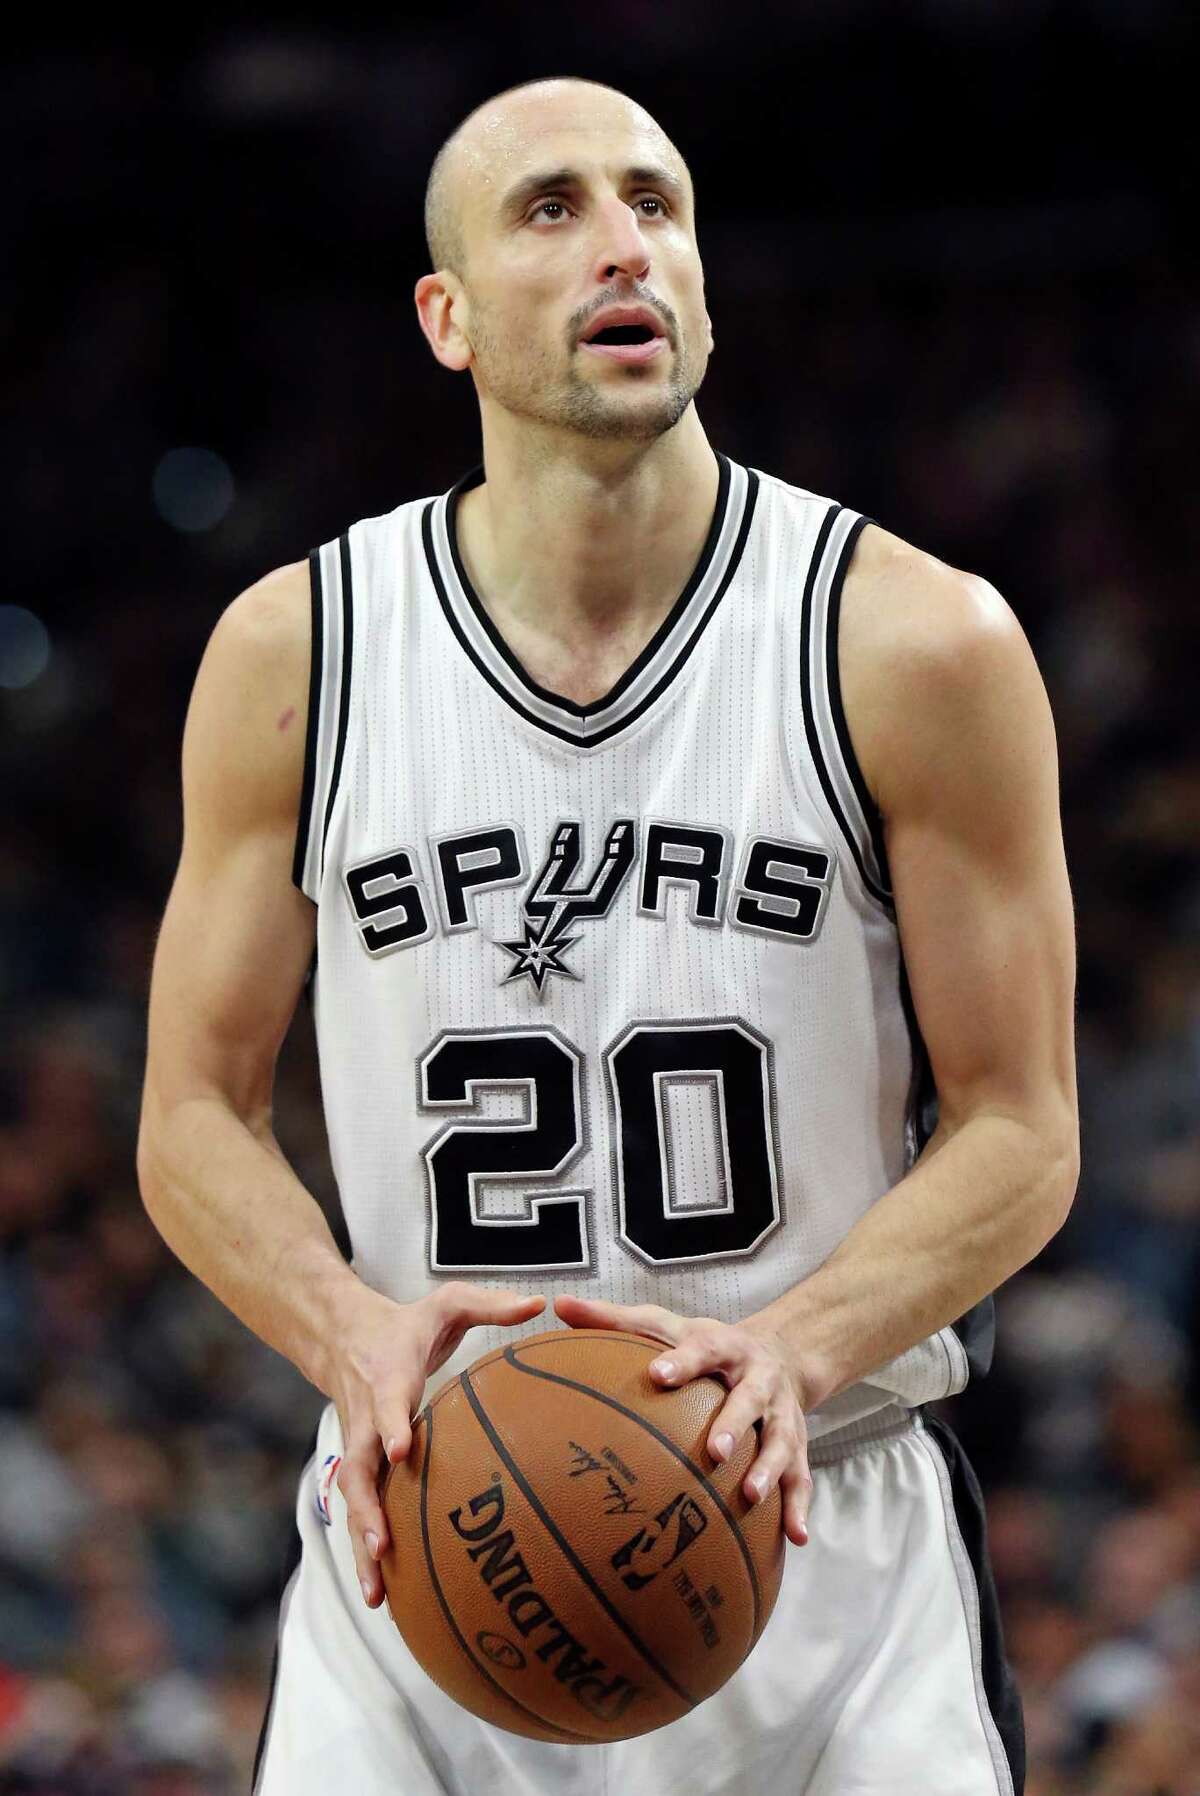 Spurs’ Manu Ginobili shoots a free throw during second half action against the Orlando Magic on Feb. 1, 2016 at the AT&T Center.